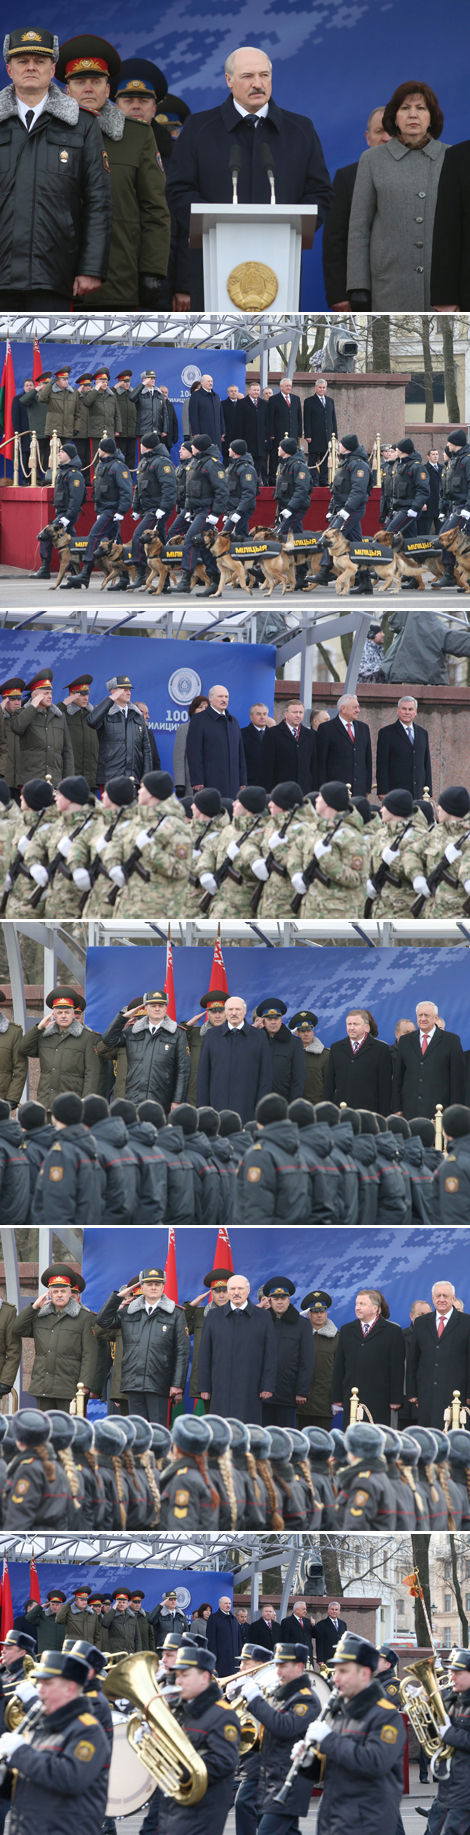 Belarus President Alexander Lukashenko speaks at the parade in honor of the 100th anniversary of the Belarusian police